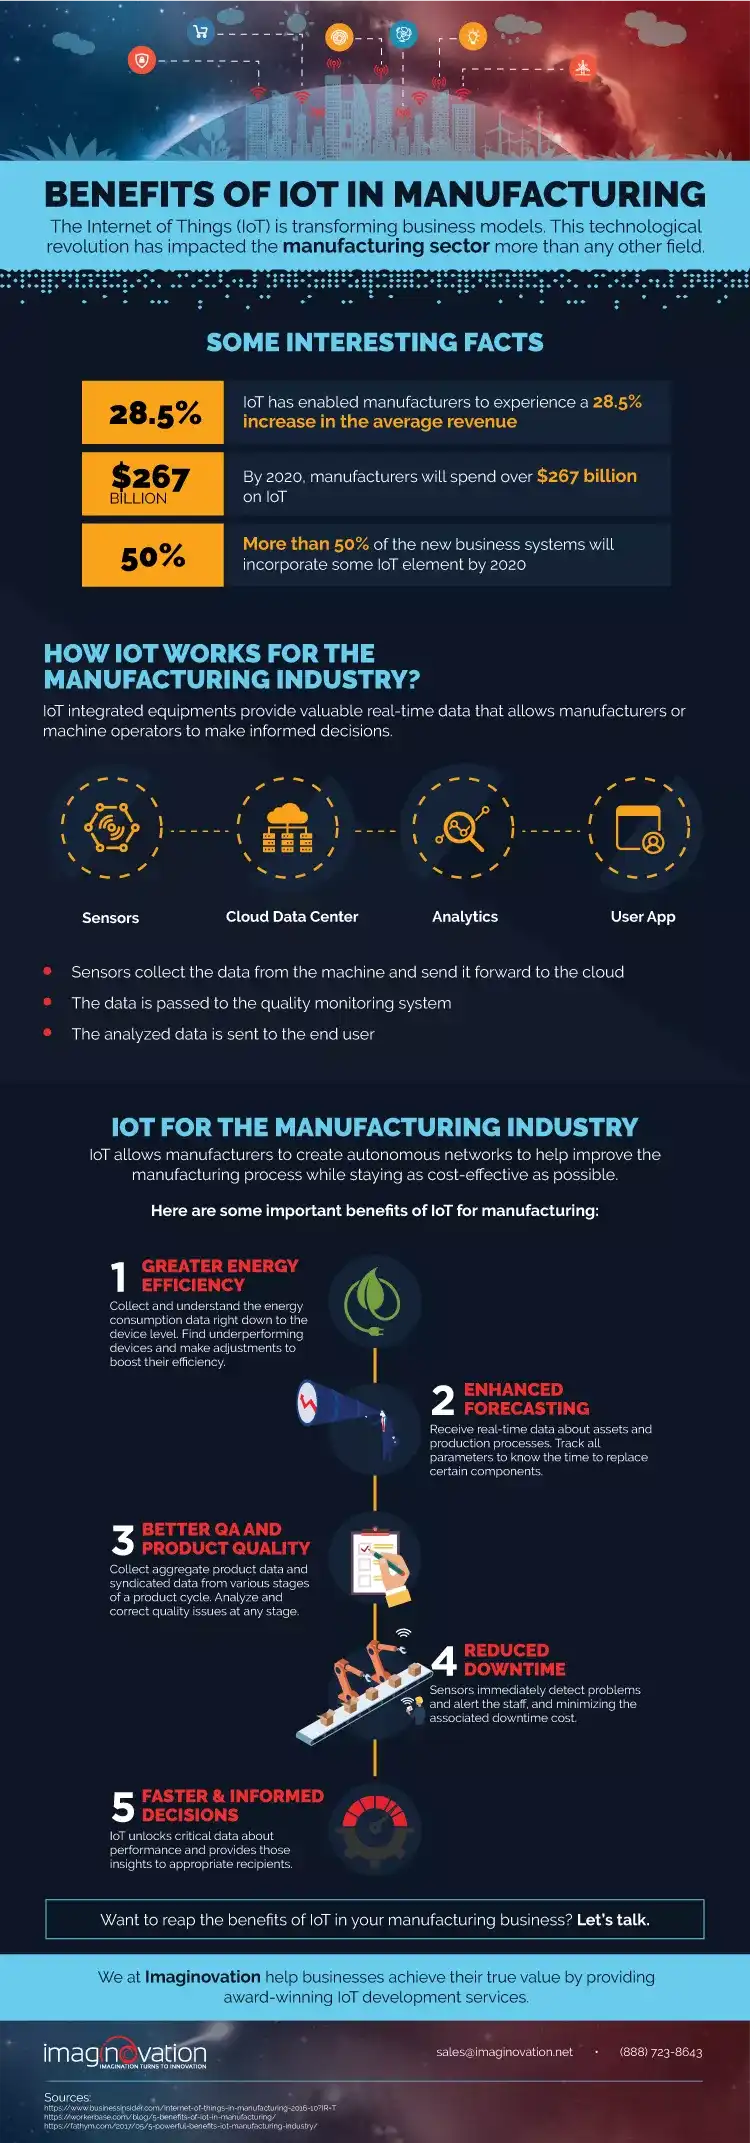 Benefits of IoT for Manufacturing